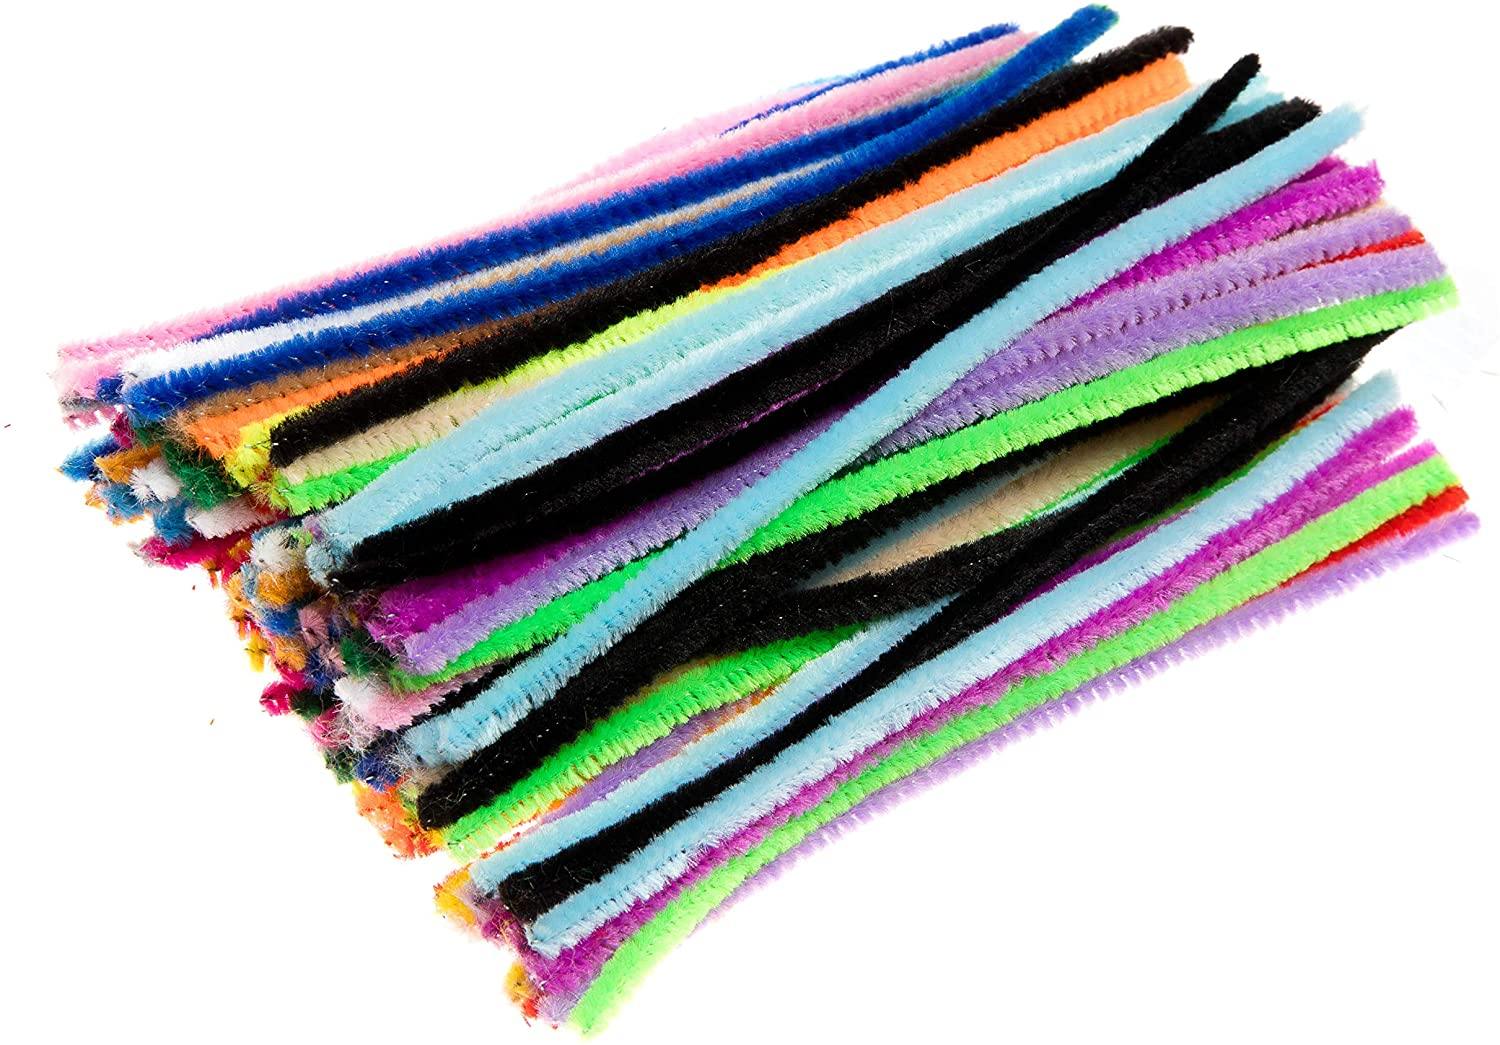 Neon Pipe Cleaners Value Pack (Pack of 120) Craft Supplies Neon